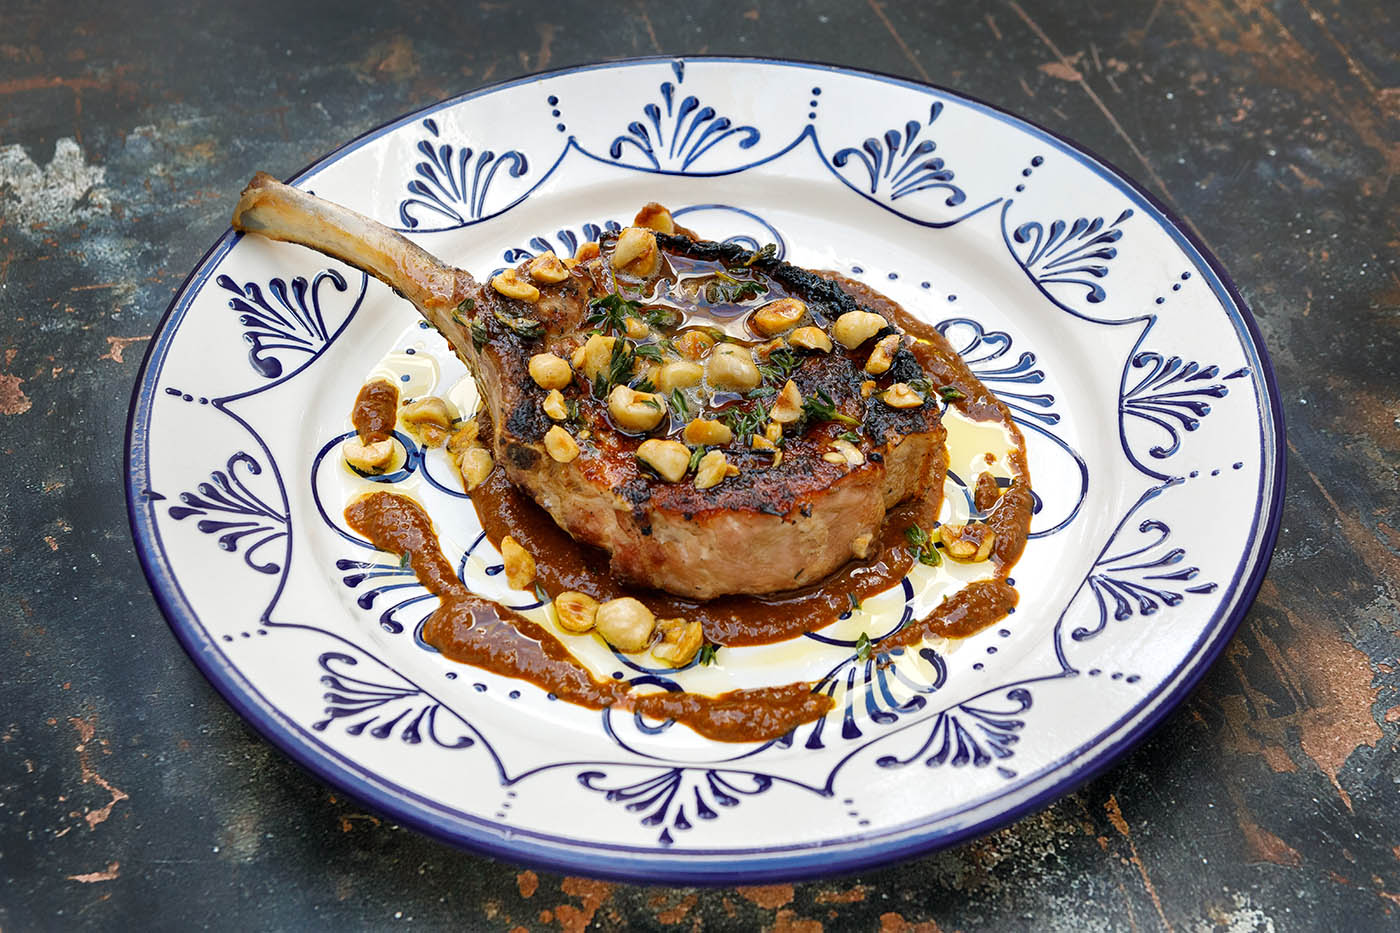 Barbecued Pork Chop with Mole Sauce